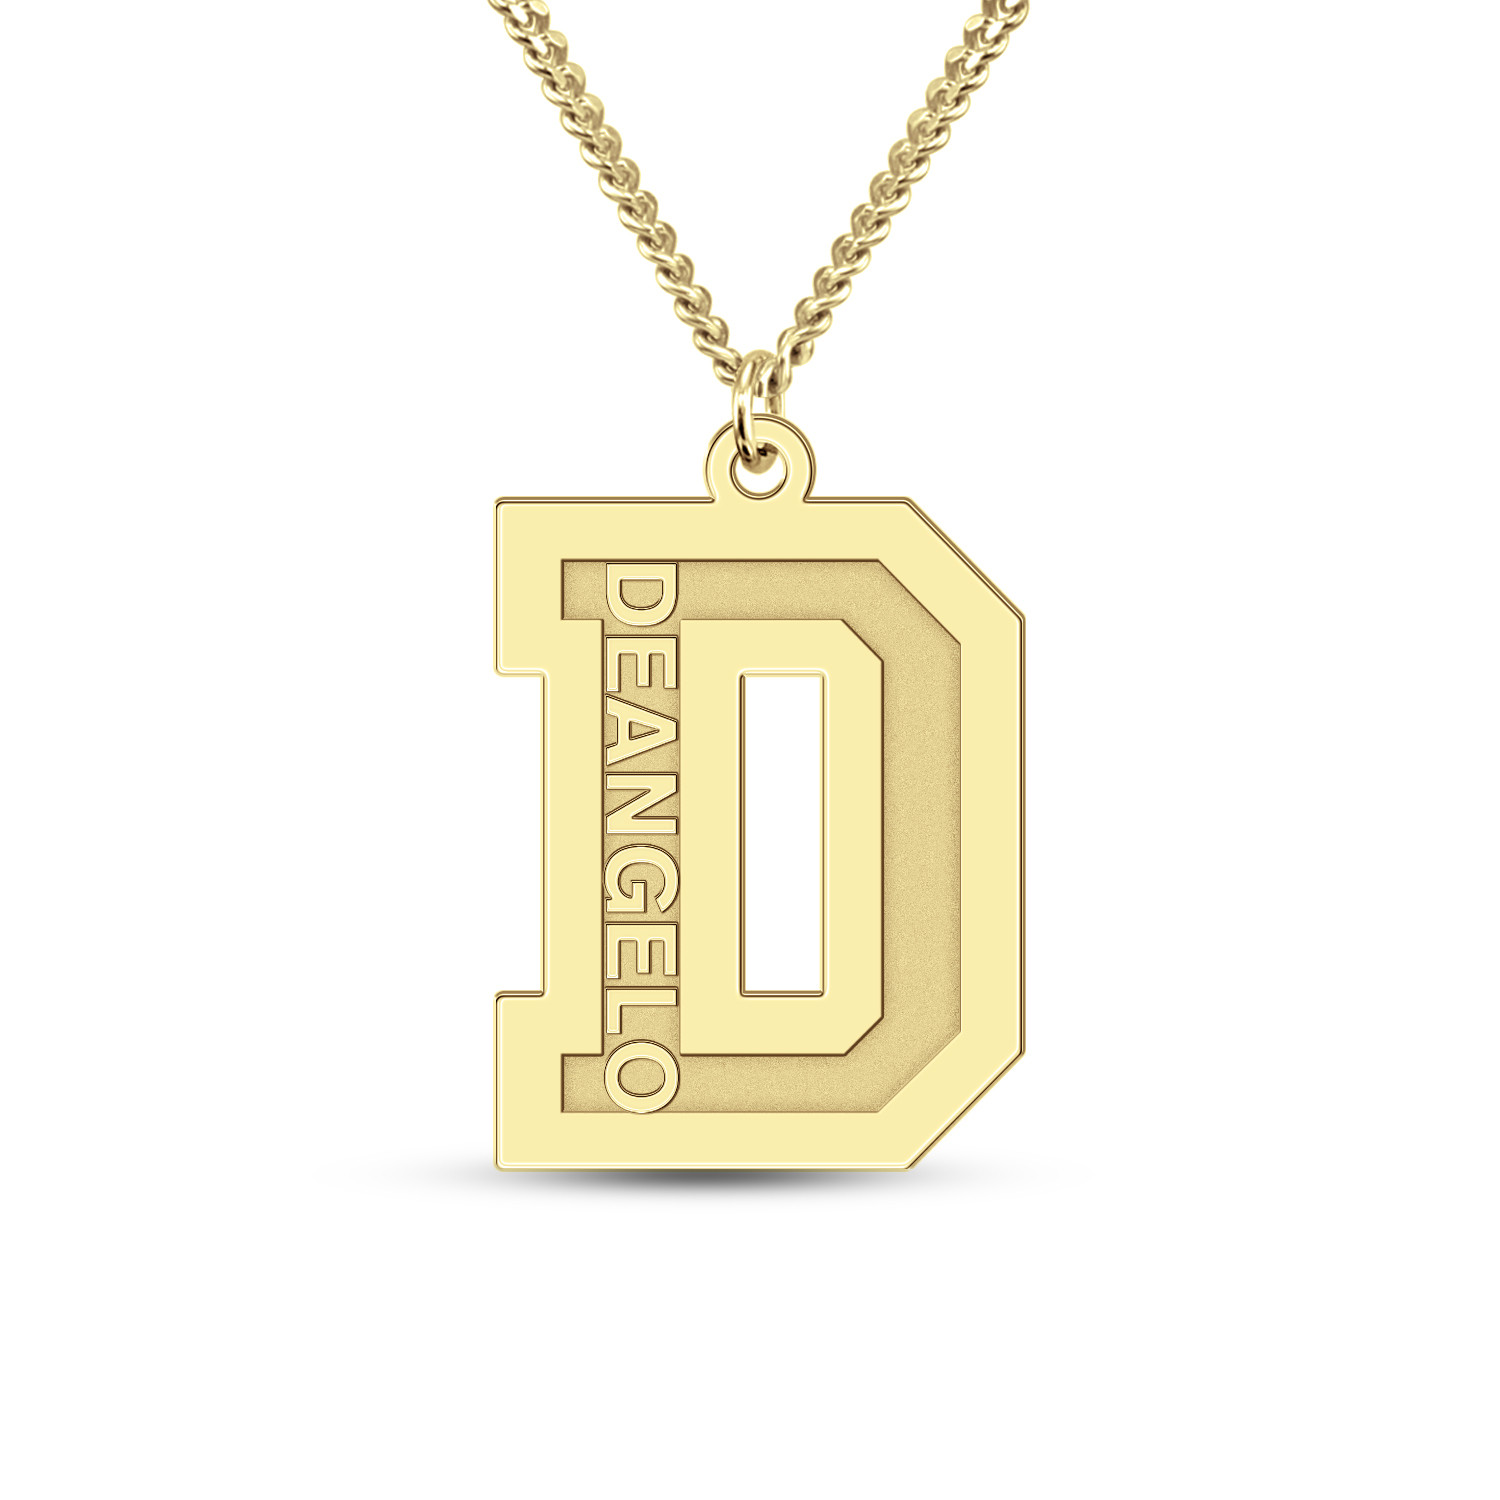 Men's Personalized Initial Pendant Necklace Diamond Accent Yellow Gold-Plated Sterling Silver 20